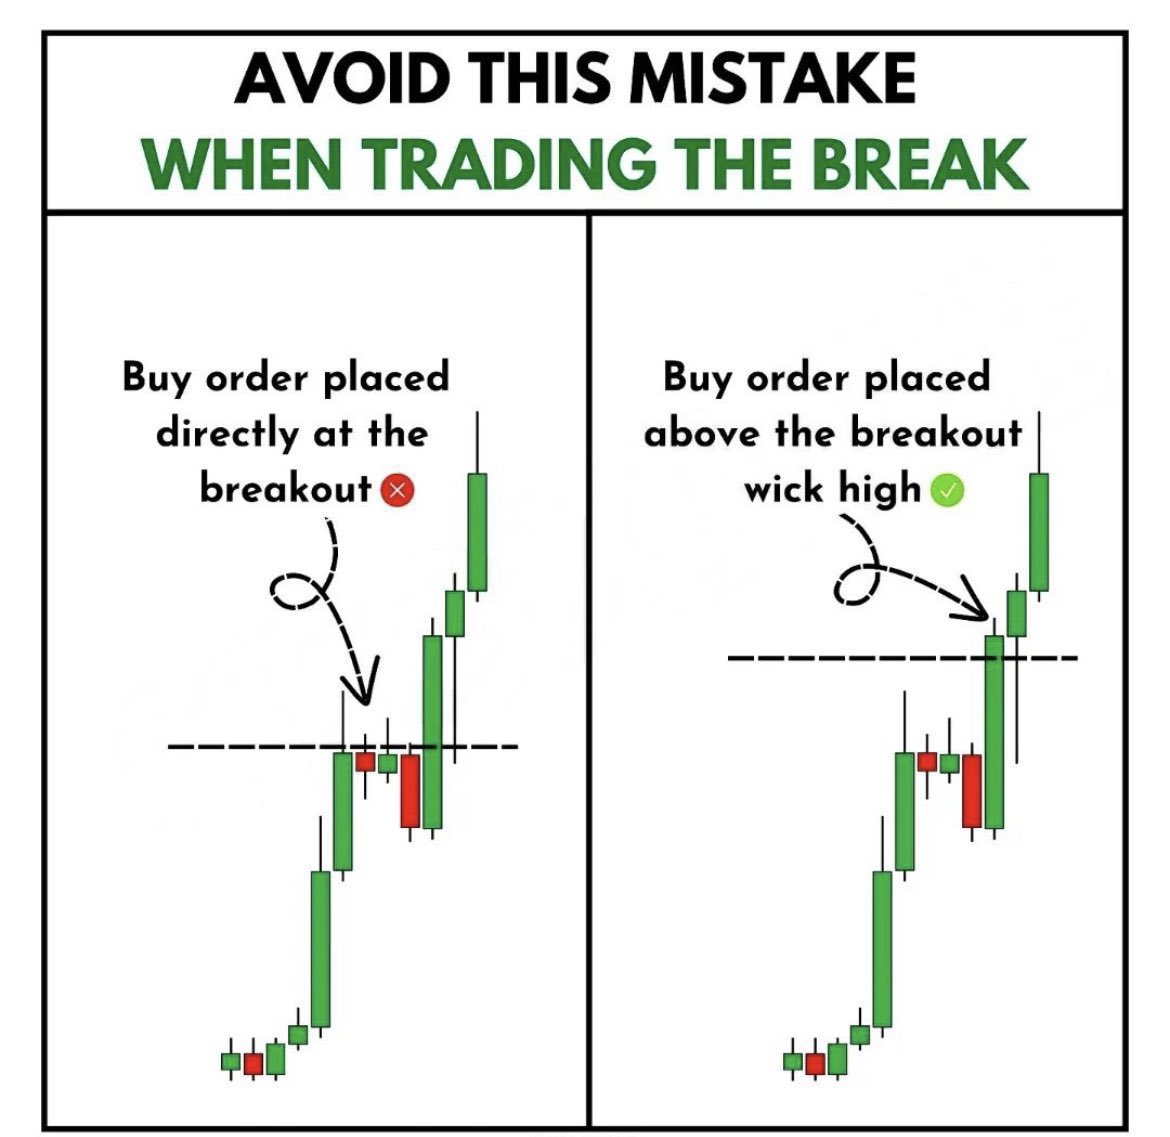 Technical Analysis Simplified.
#intraday #StockMarketindia #banknifty #nifty50 #StockMarkets
#Nifty #stocks #StockMarket #investment